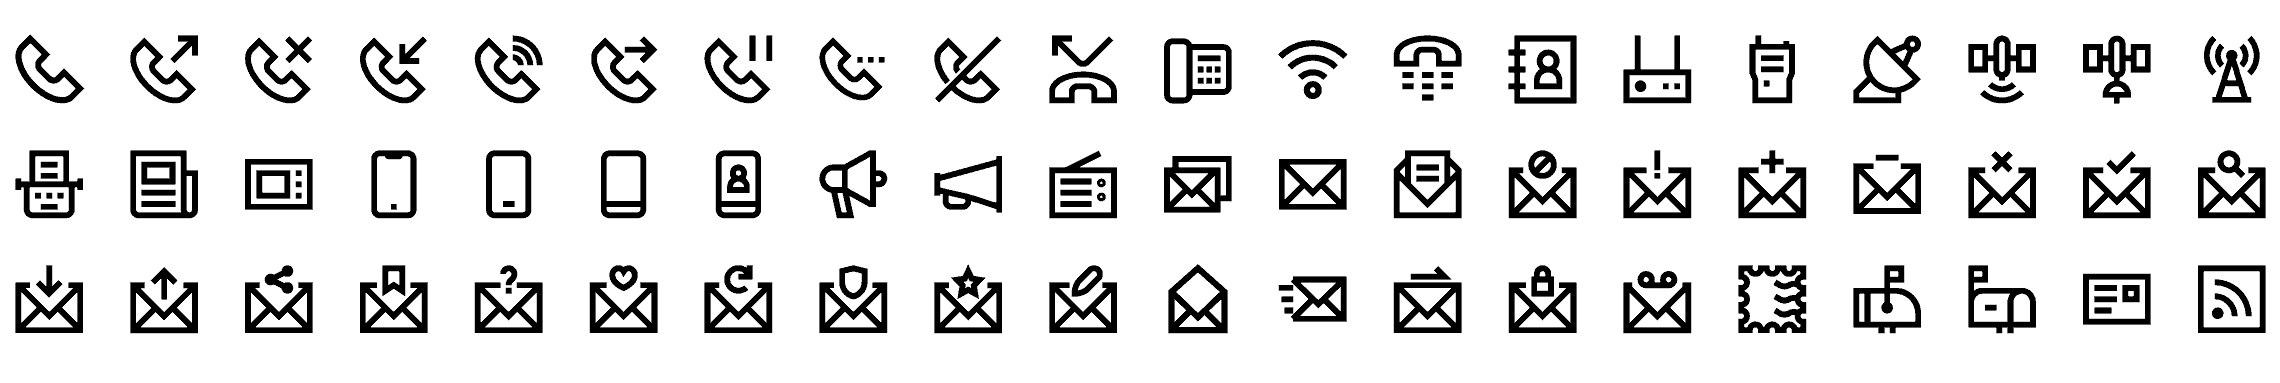 communication-mini-bold-icons-preview-settings